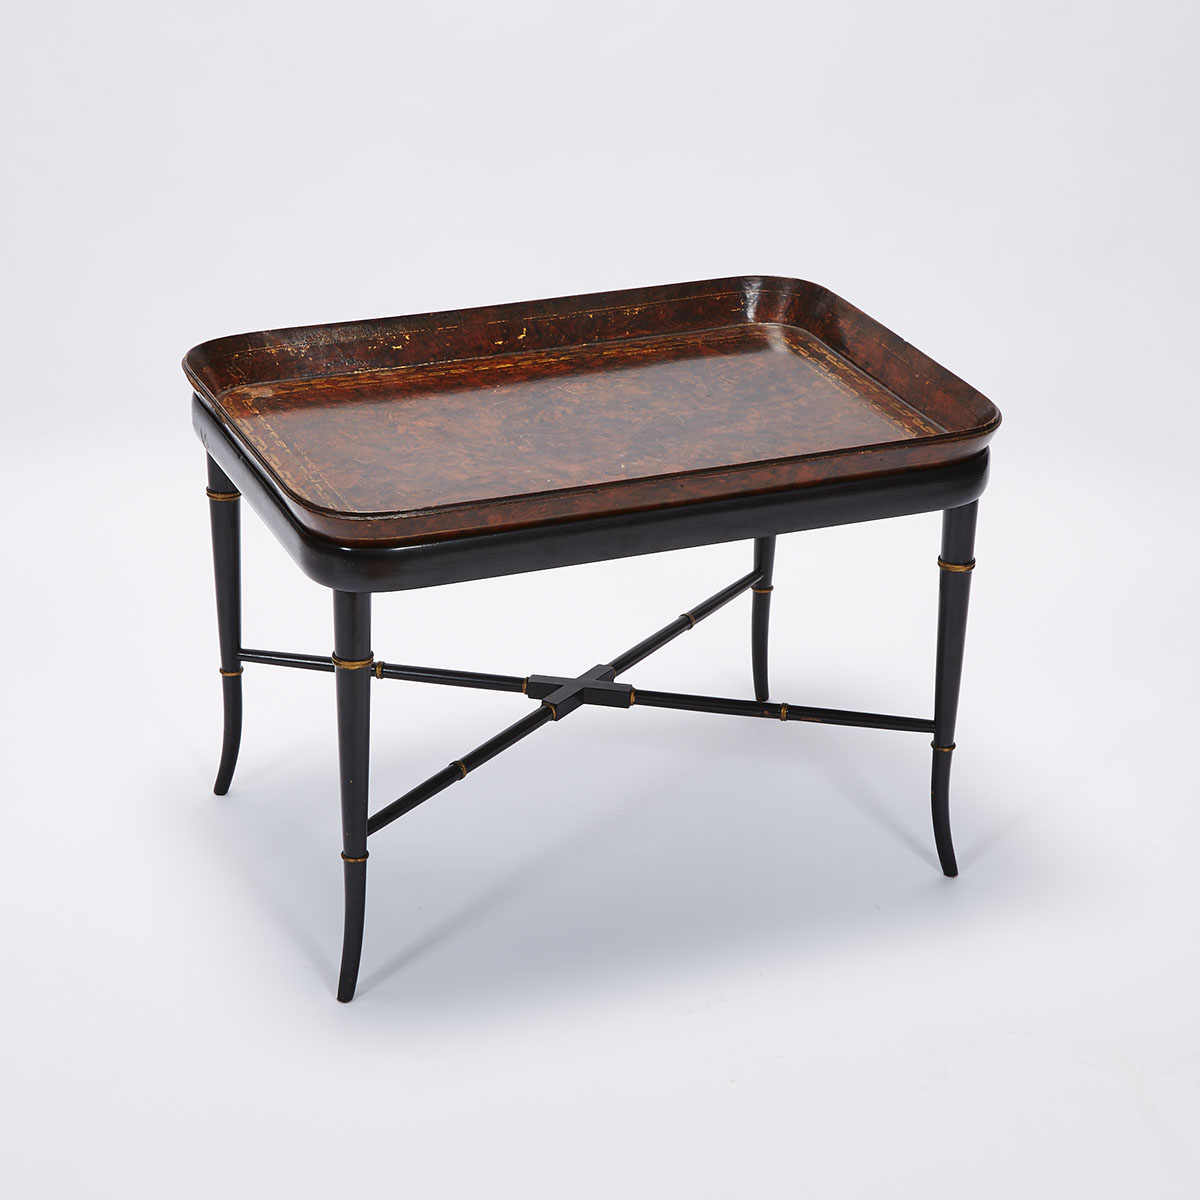 Victorian Faux Burl Walnut Papier Maché Tea Tray, 19th century, on Later Stand